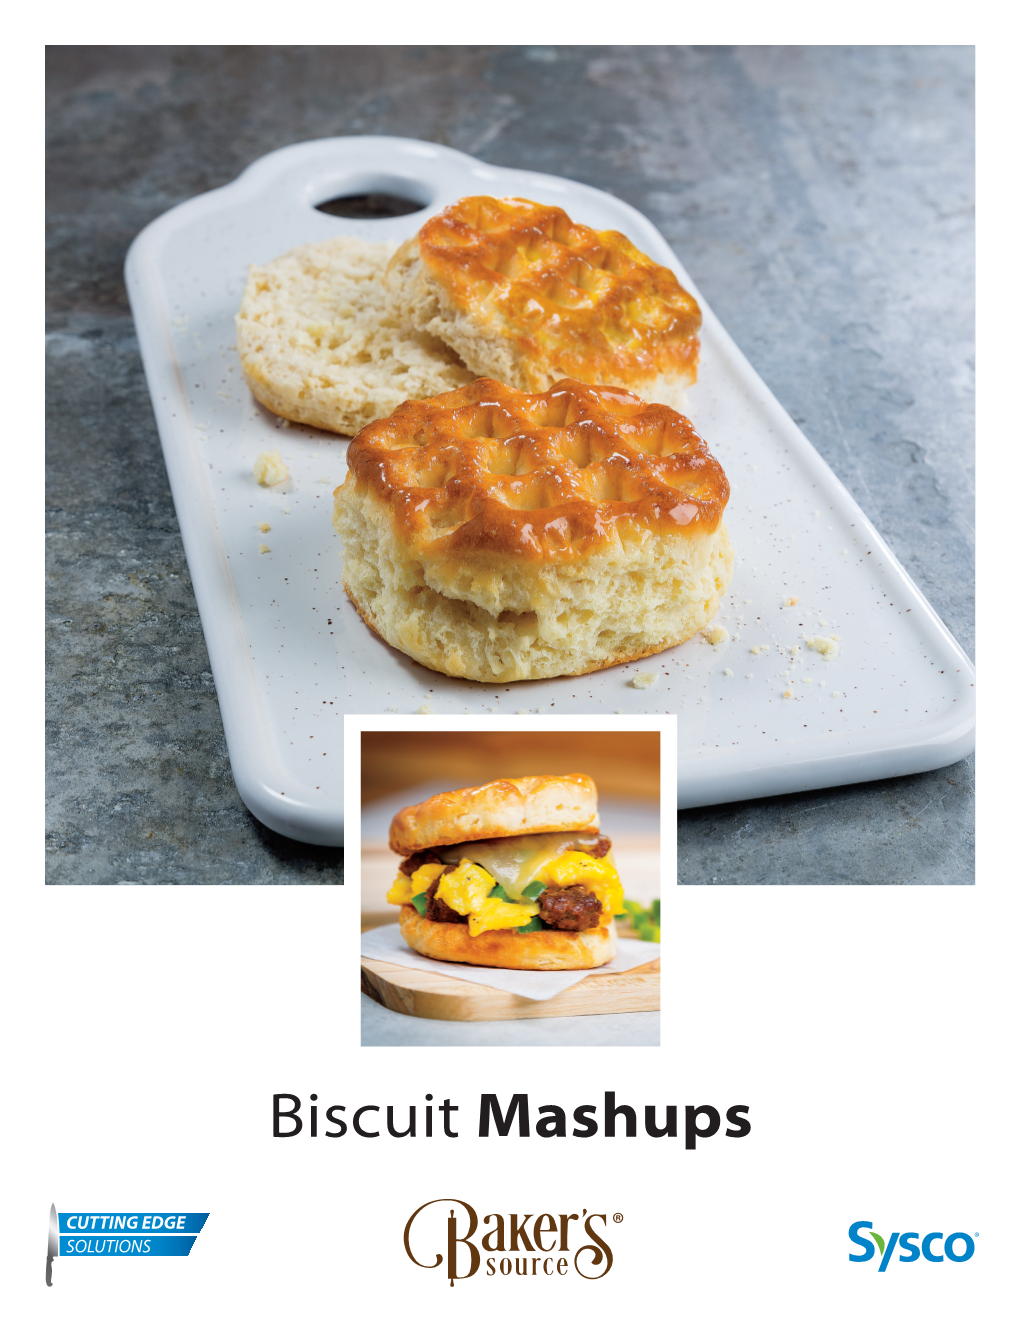 Biscuit Mashups Enhance Your All-Day Breakfast Oﬀ Erings with Baker’S Source Imperial Biscuit Mashups